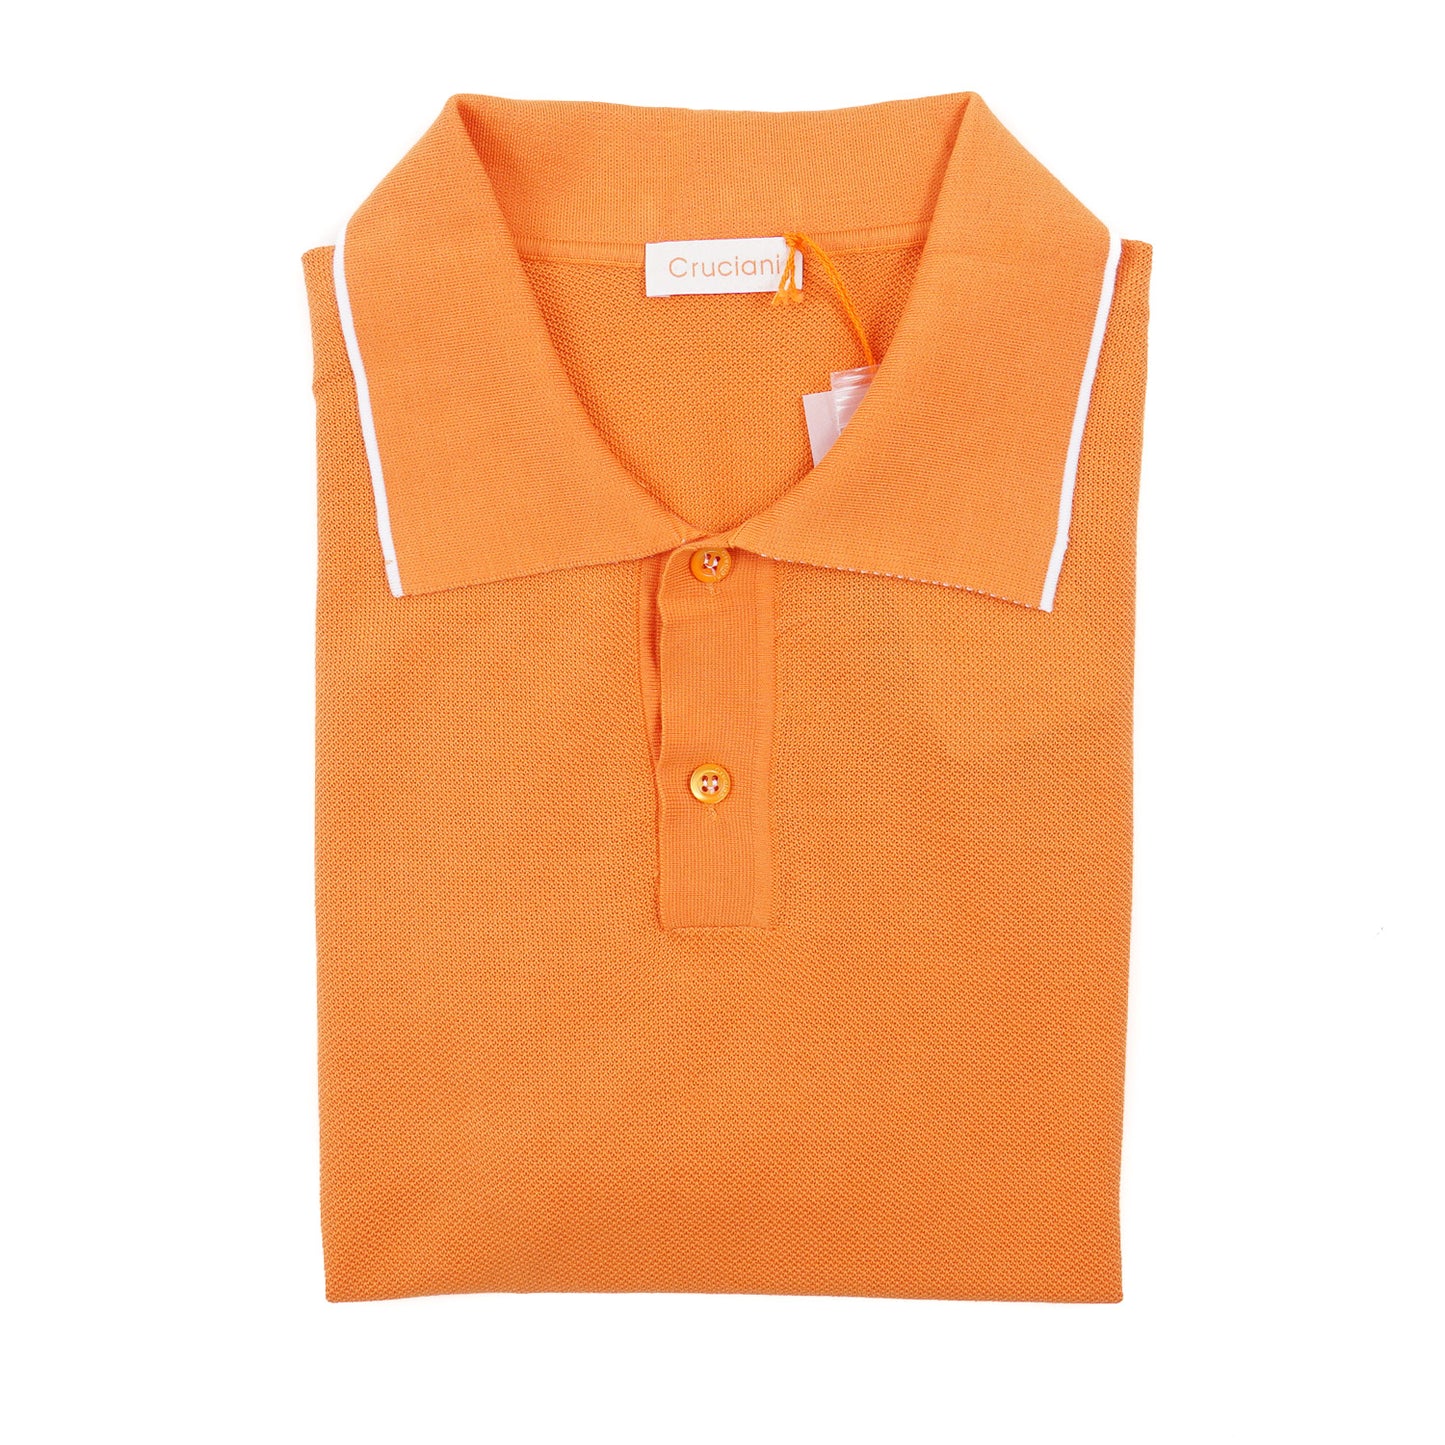 Cruciani Cotton Polo with Contrast Tipping - Top Shelf Apparel